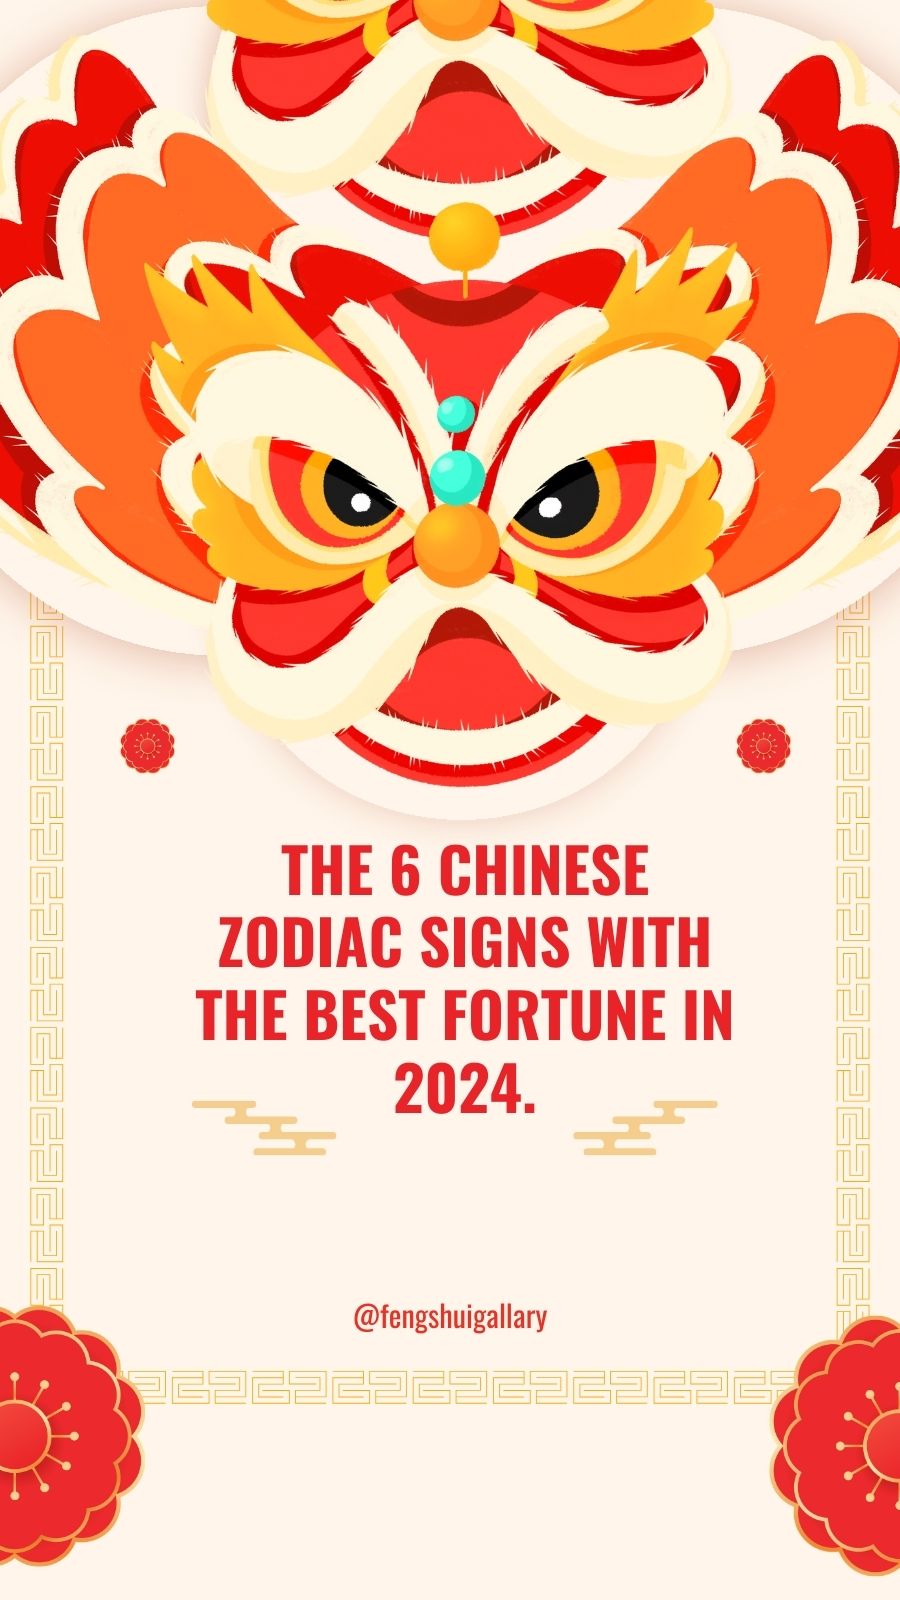 6 Chinese zodiac signs with the best fortune in 2024